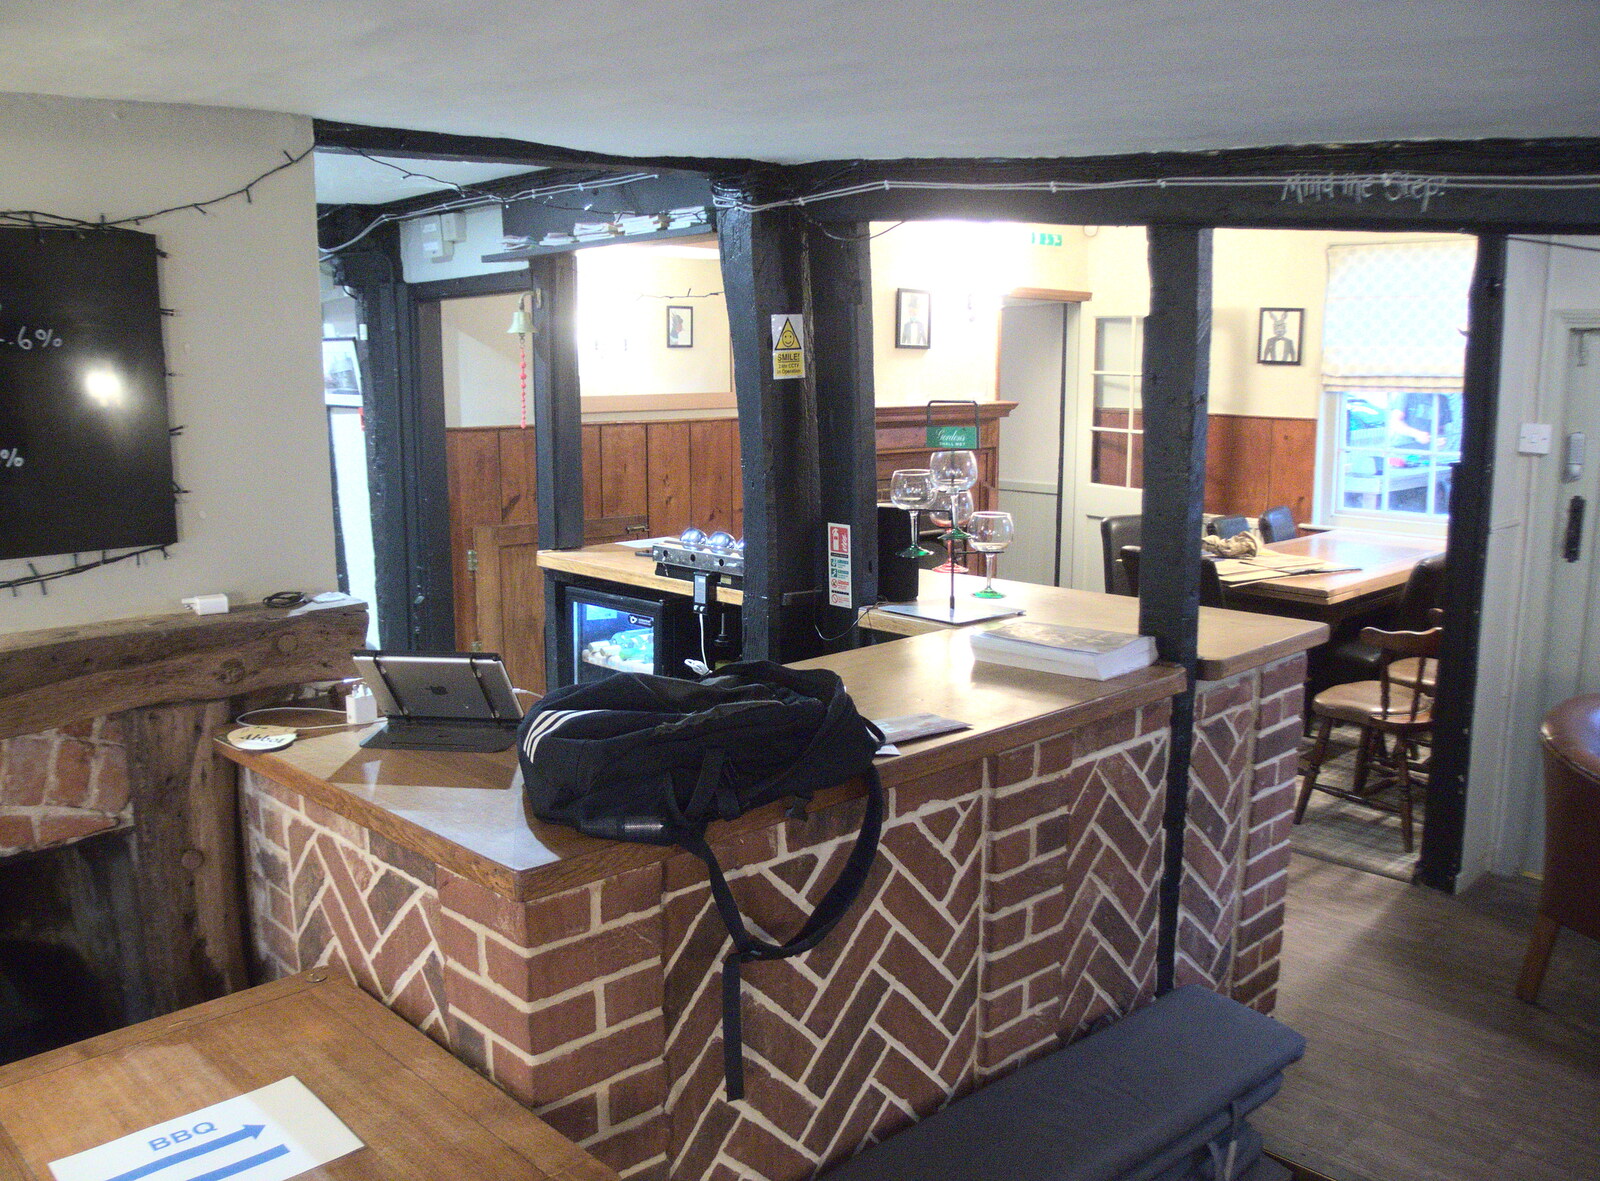 The BSCC at the Cross Keys, Redgrave, Suffolk - 25th August 2022: The back bar at the Cross Keys